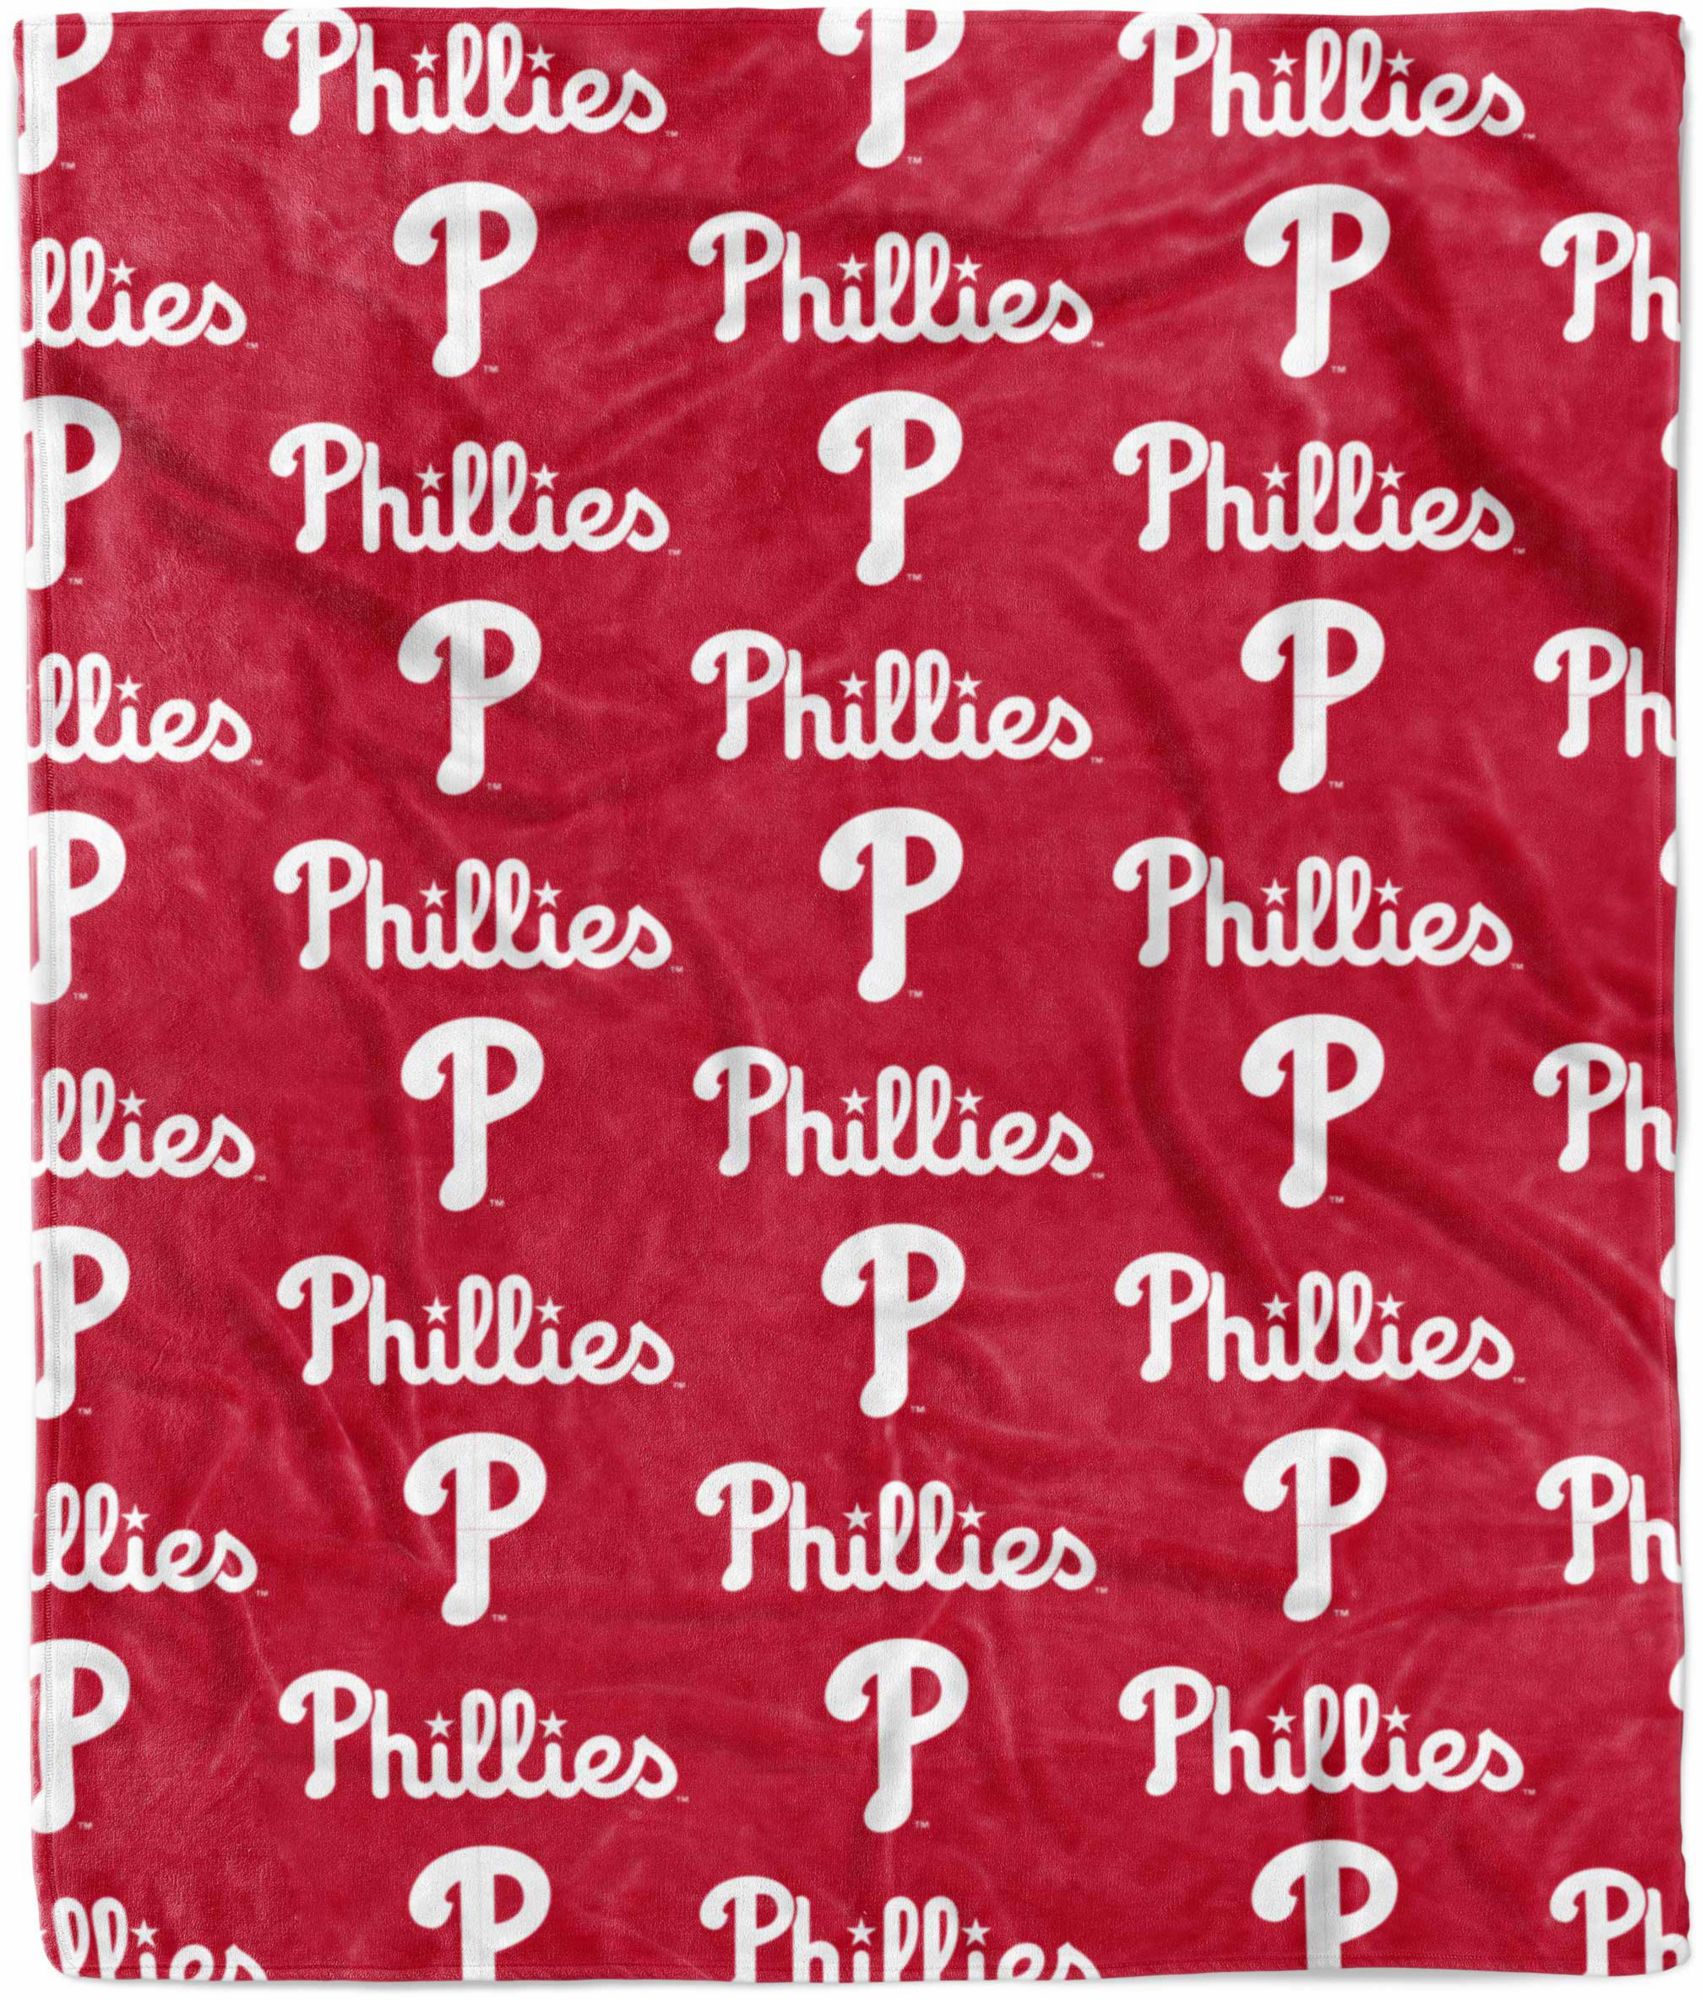 Philadelphia Phillies Apparel, Collectibles, and Fan Gear. Page 2FOCO